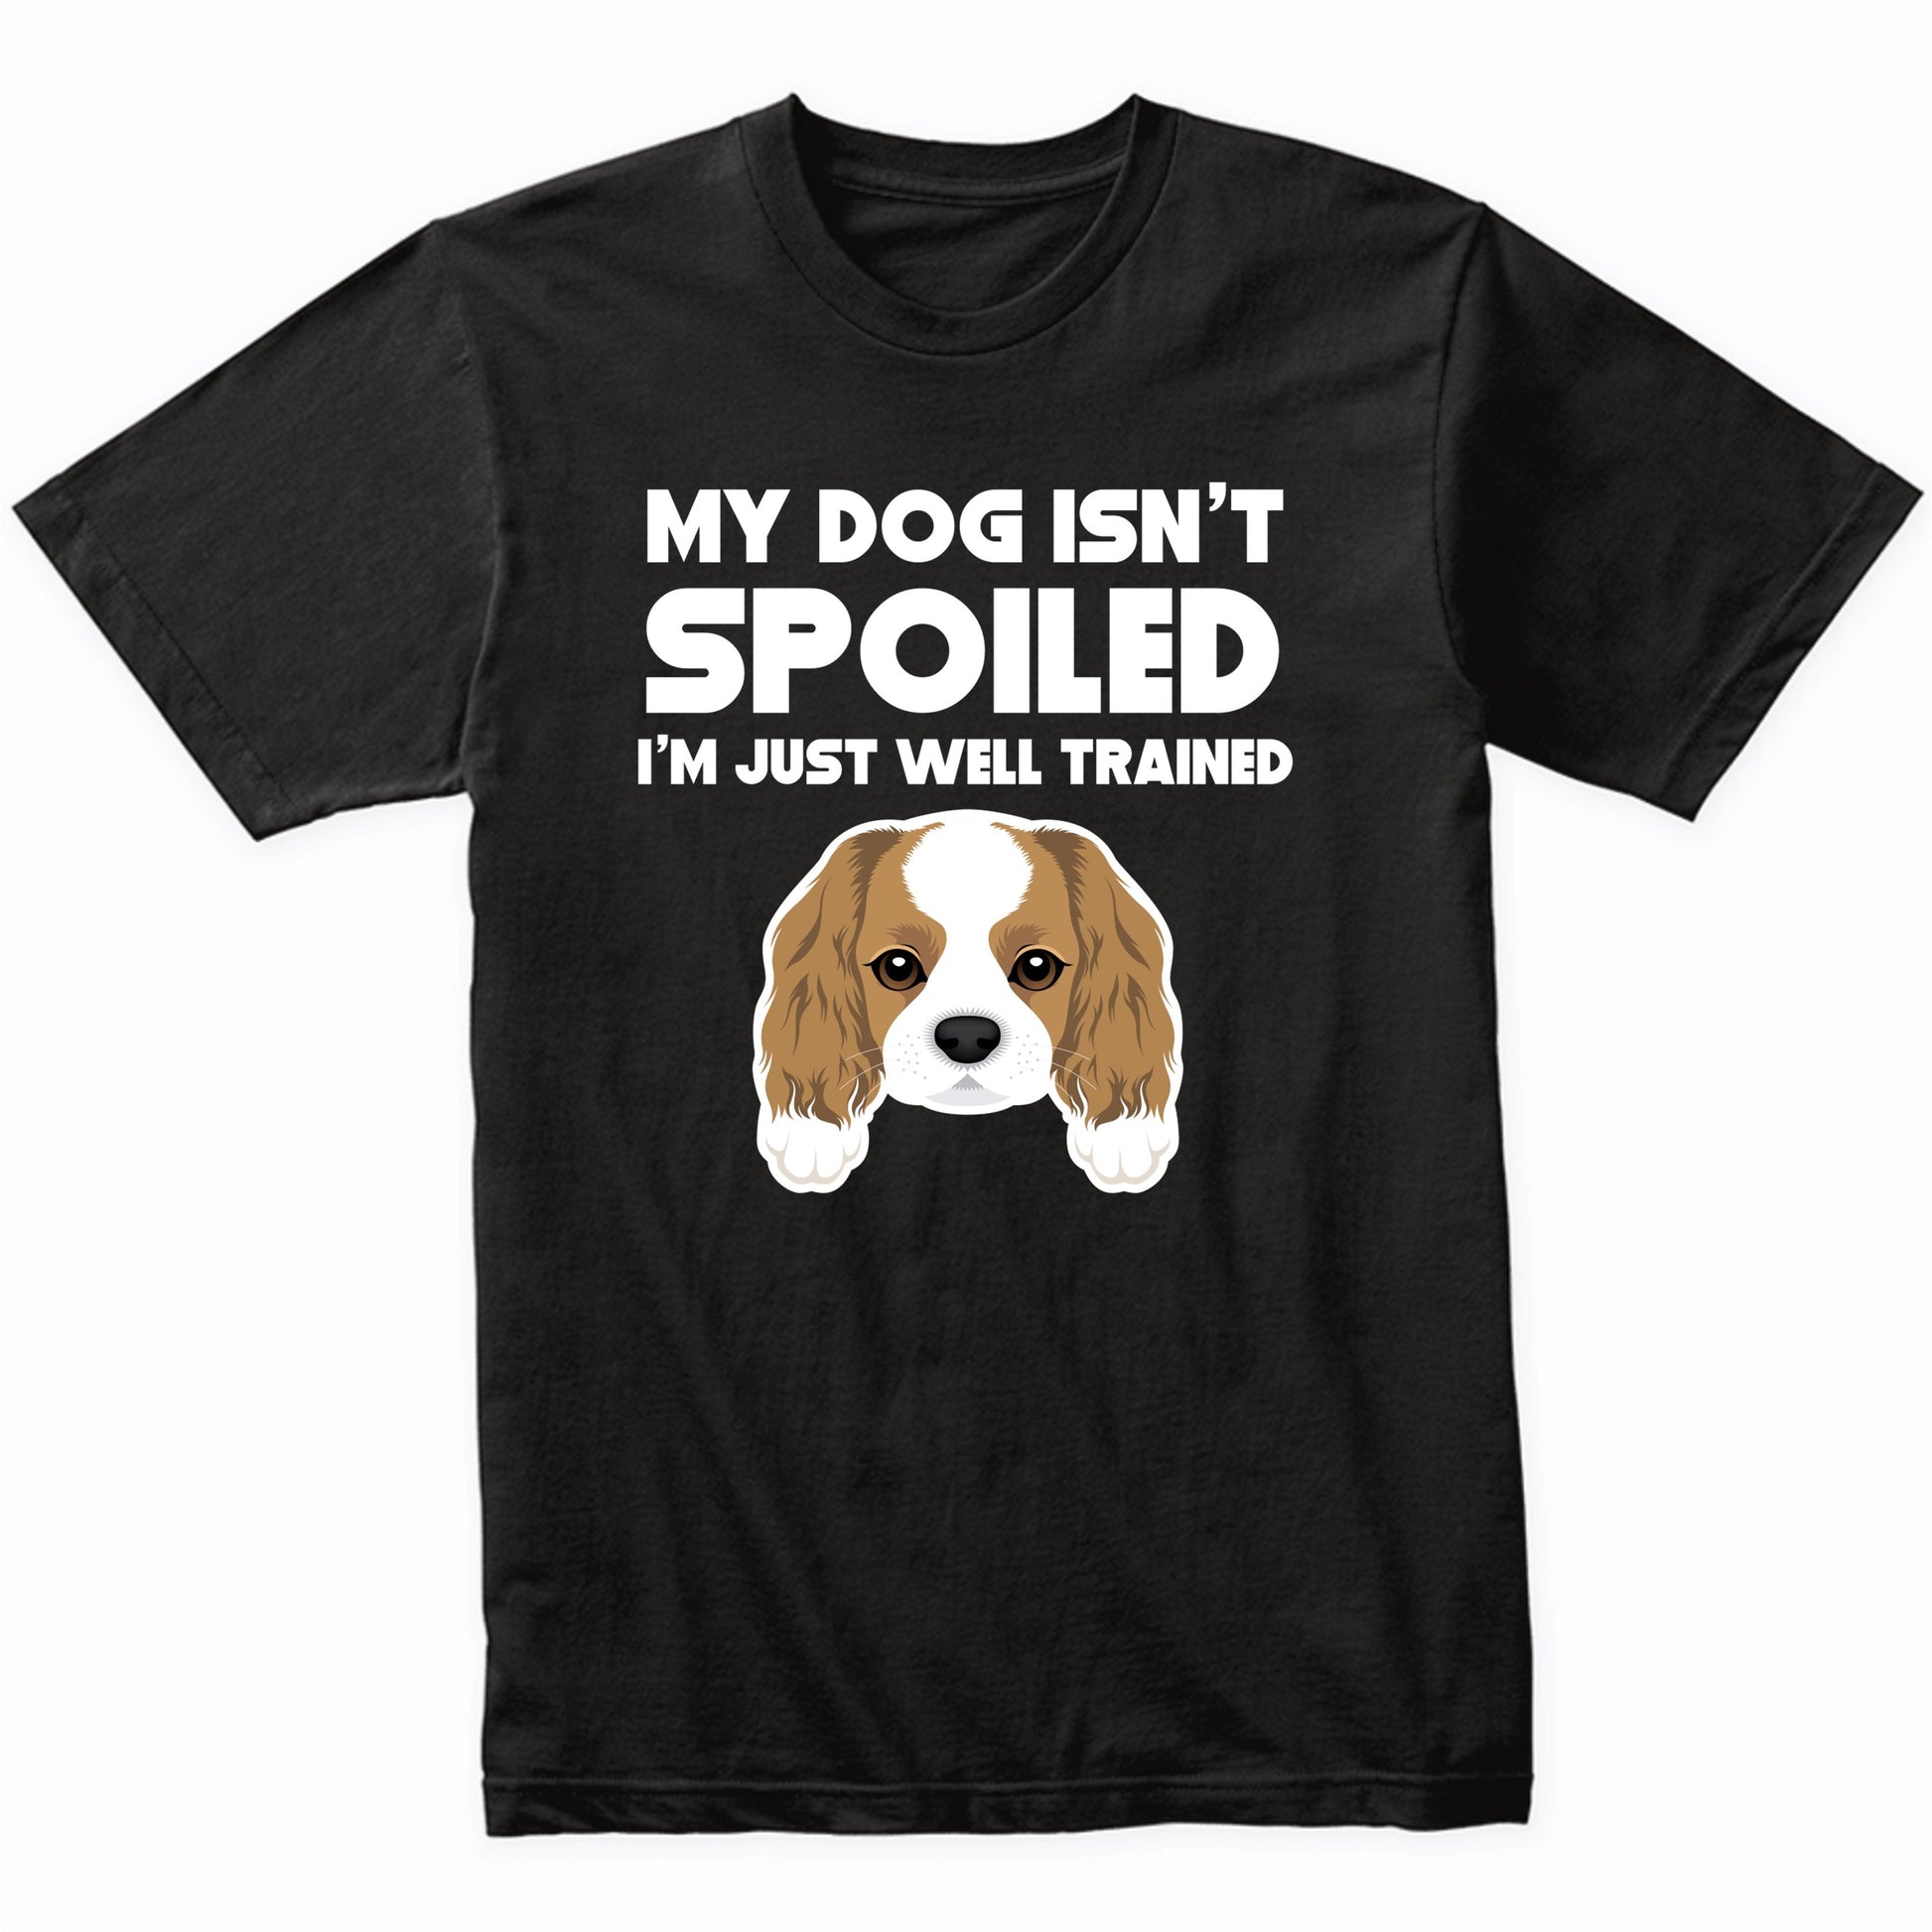 My Dog Isn't Spoiled I'm Just Well Trained Funny Cavalier King Charles Spaniel T-Shirt